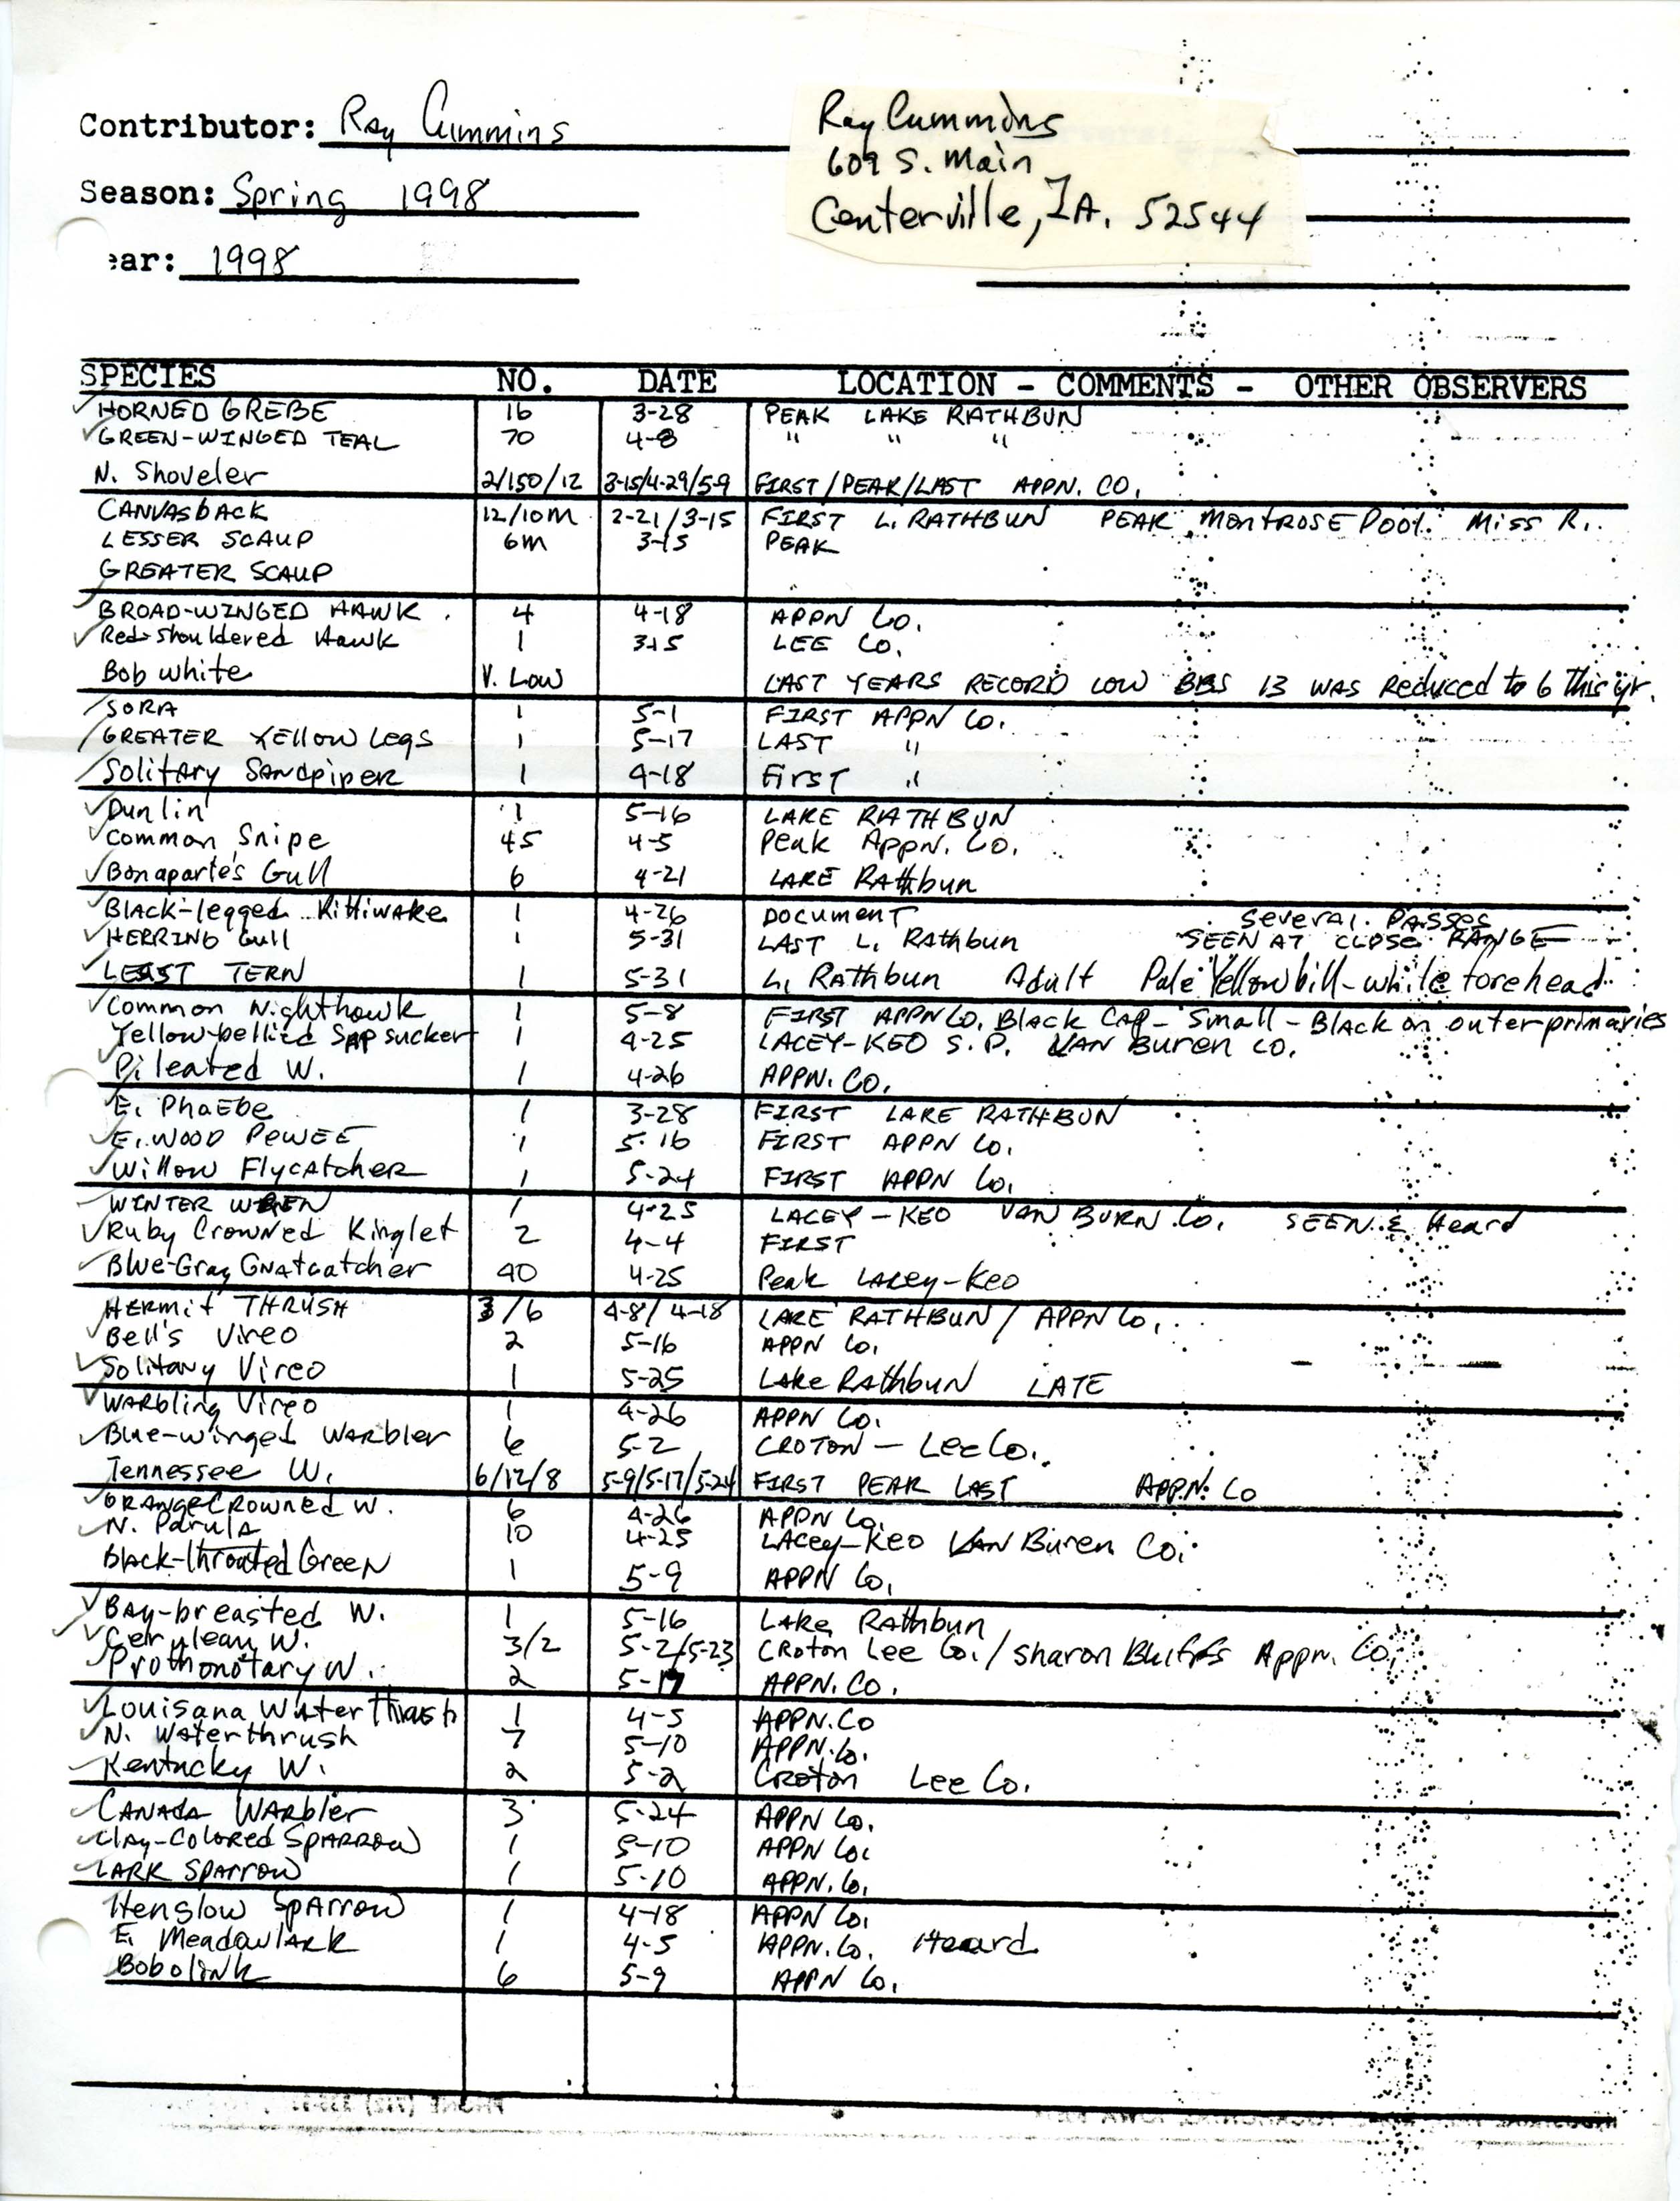 Annotated bird sighting list for spring 1998 compiled by Ray Cummins